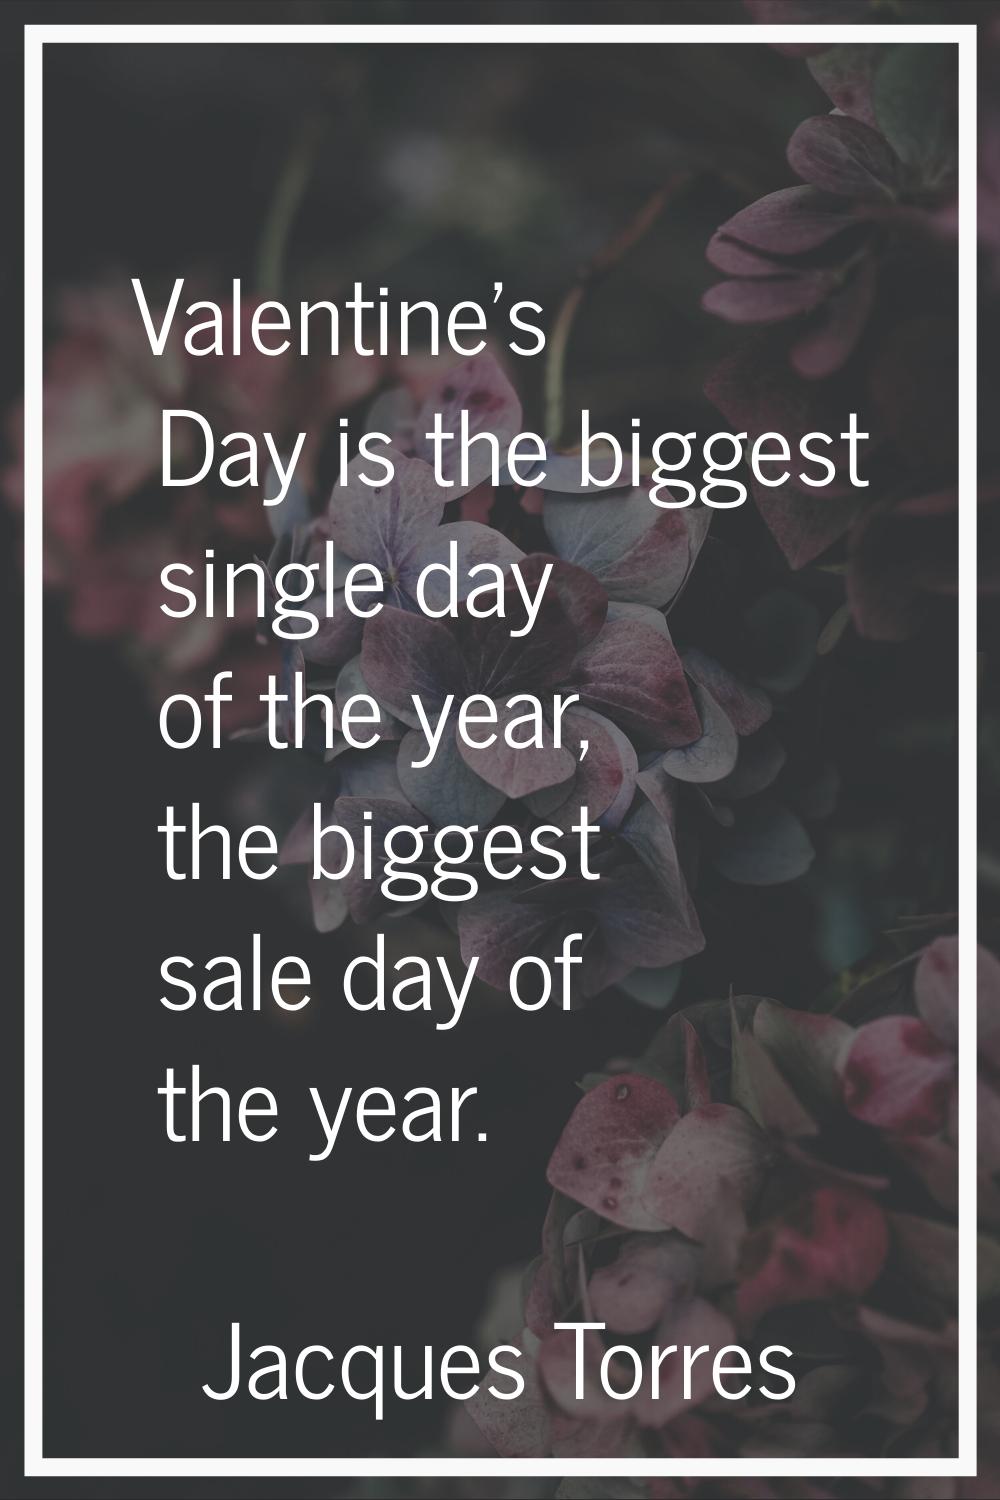 Valentine's Day is the biggest single day of the year, the biggest sale day of the year.